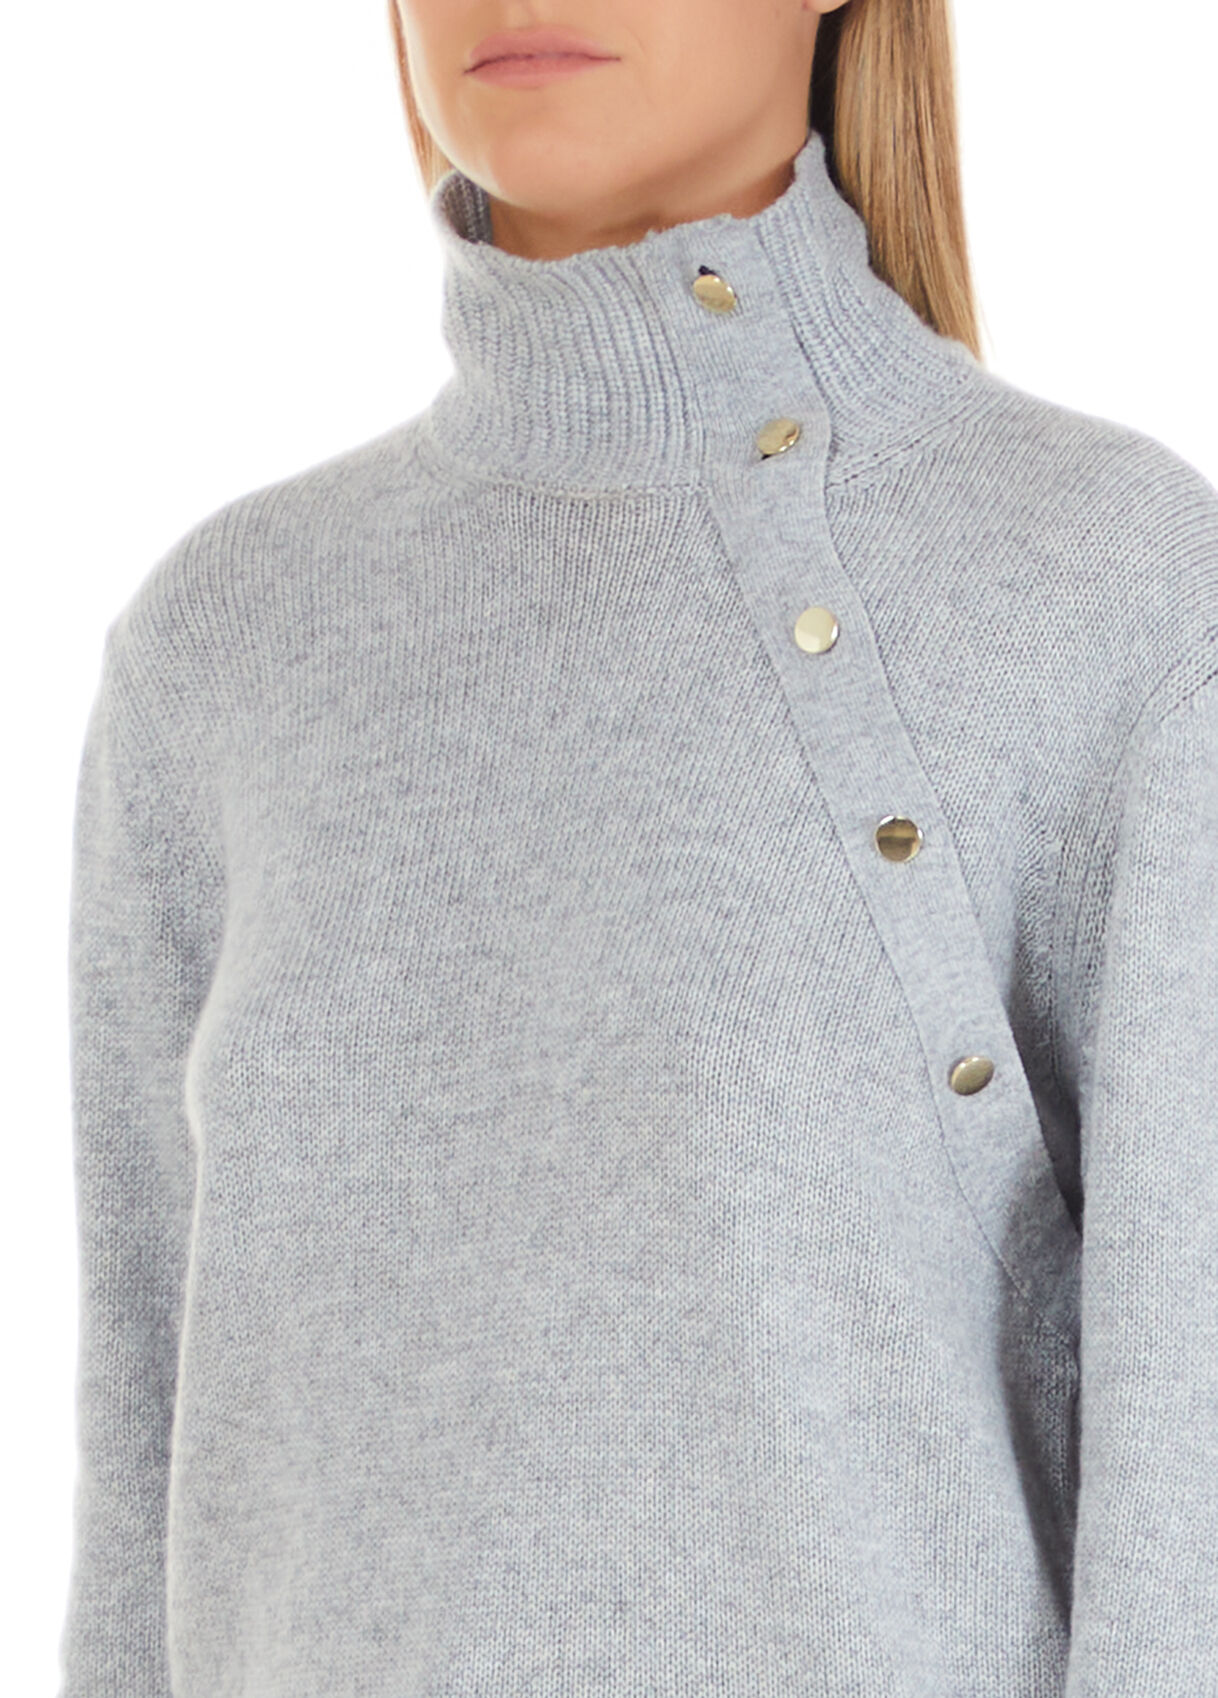 Jumper with metal buttons